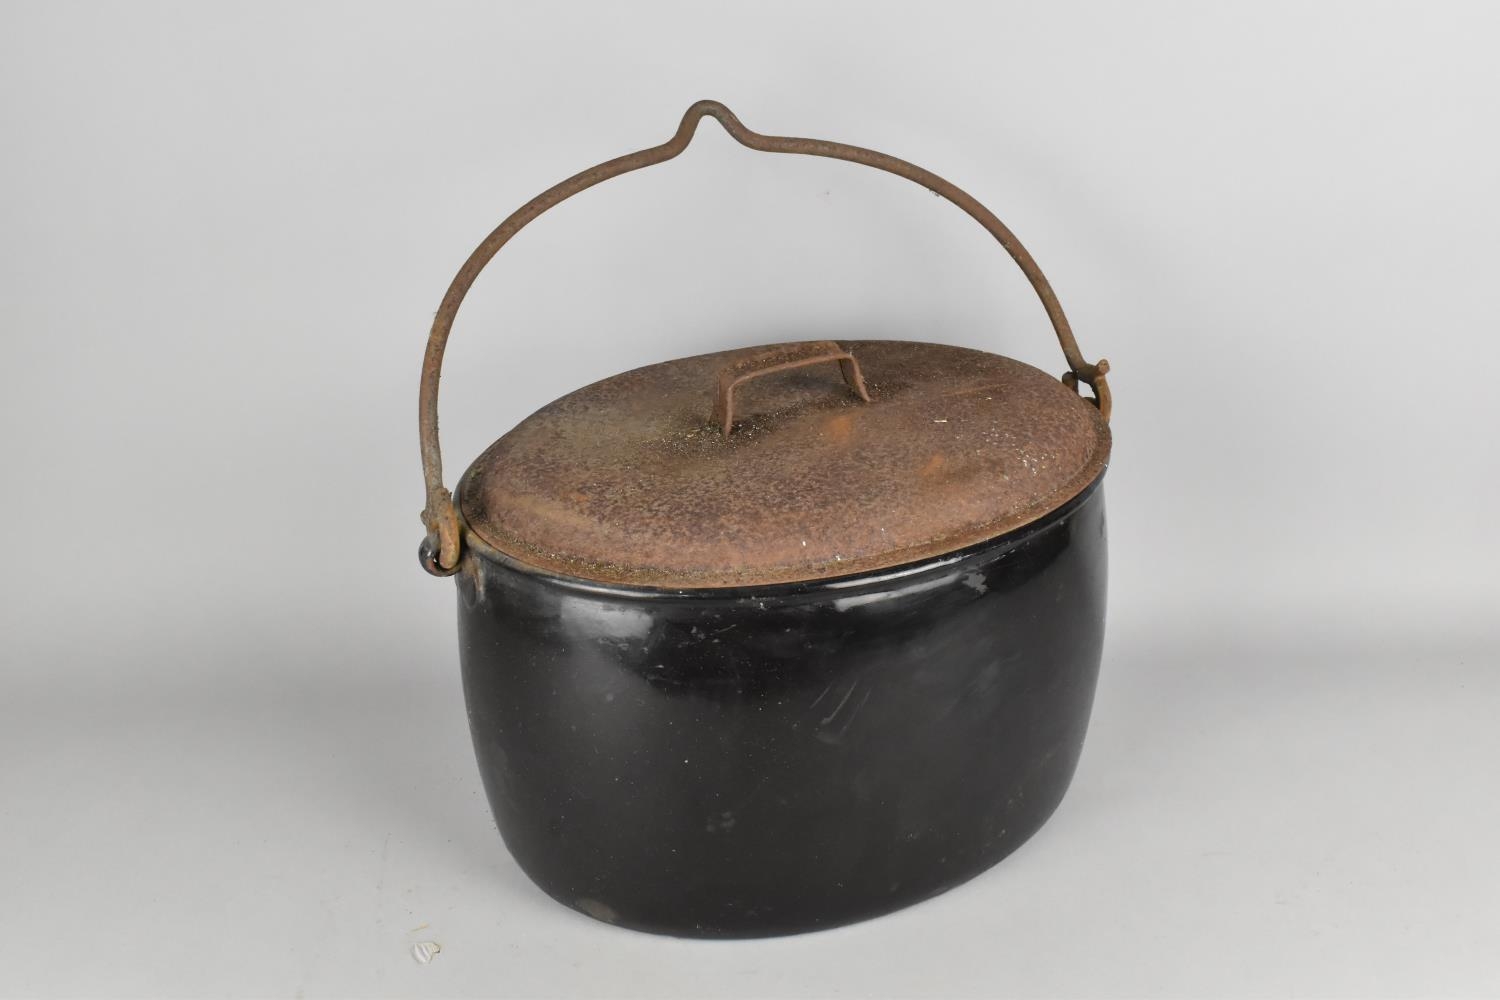 A Large Vintage Enamel Cooking Pot with Iron Loop Handle, 41cm wide